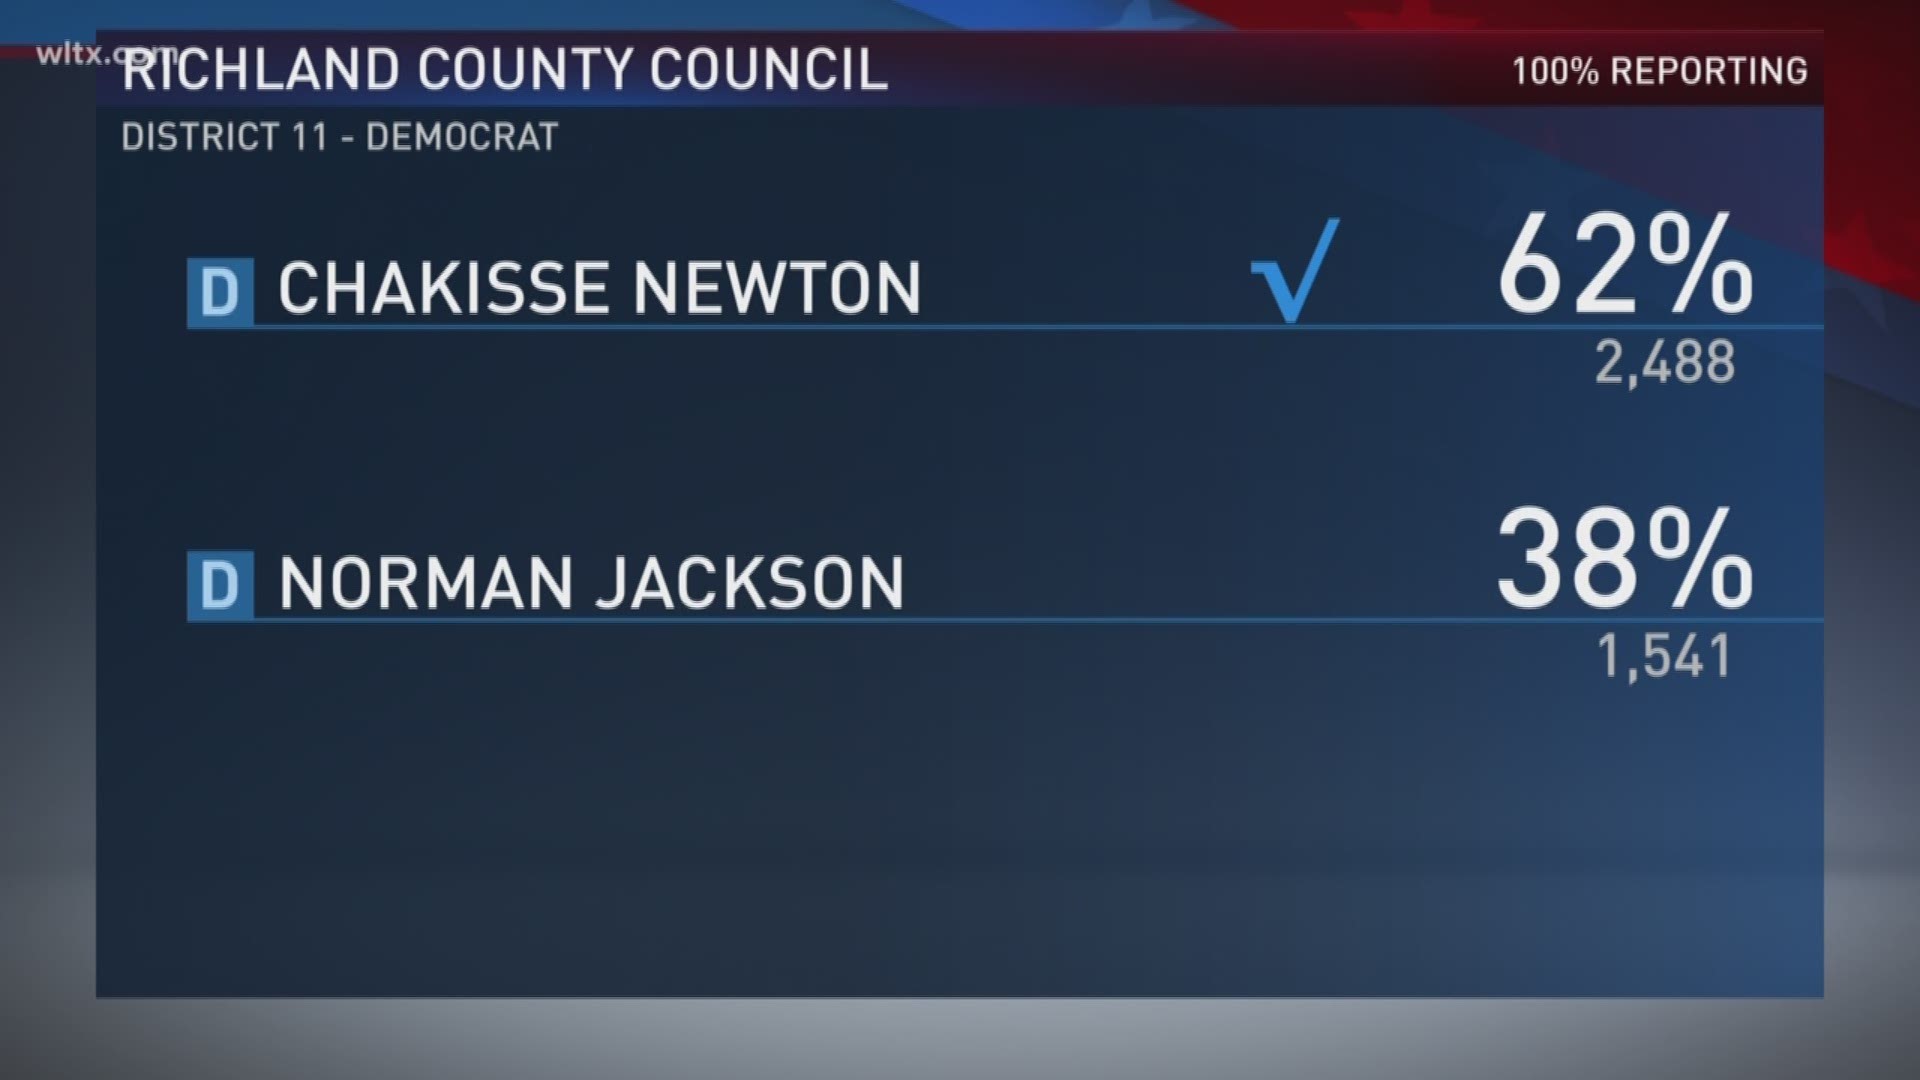 Richland county council has an upset Chakisse Newton has beaten incumbent 